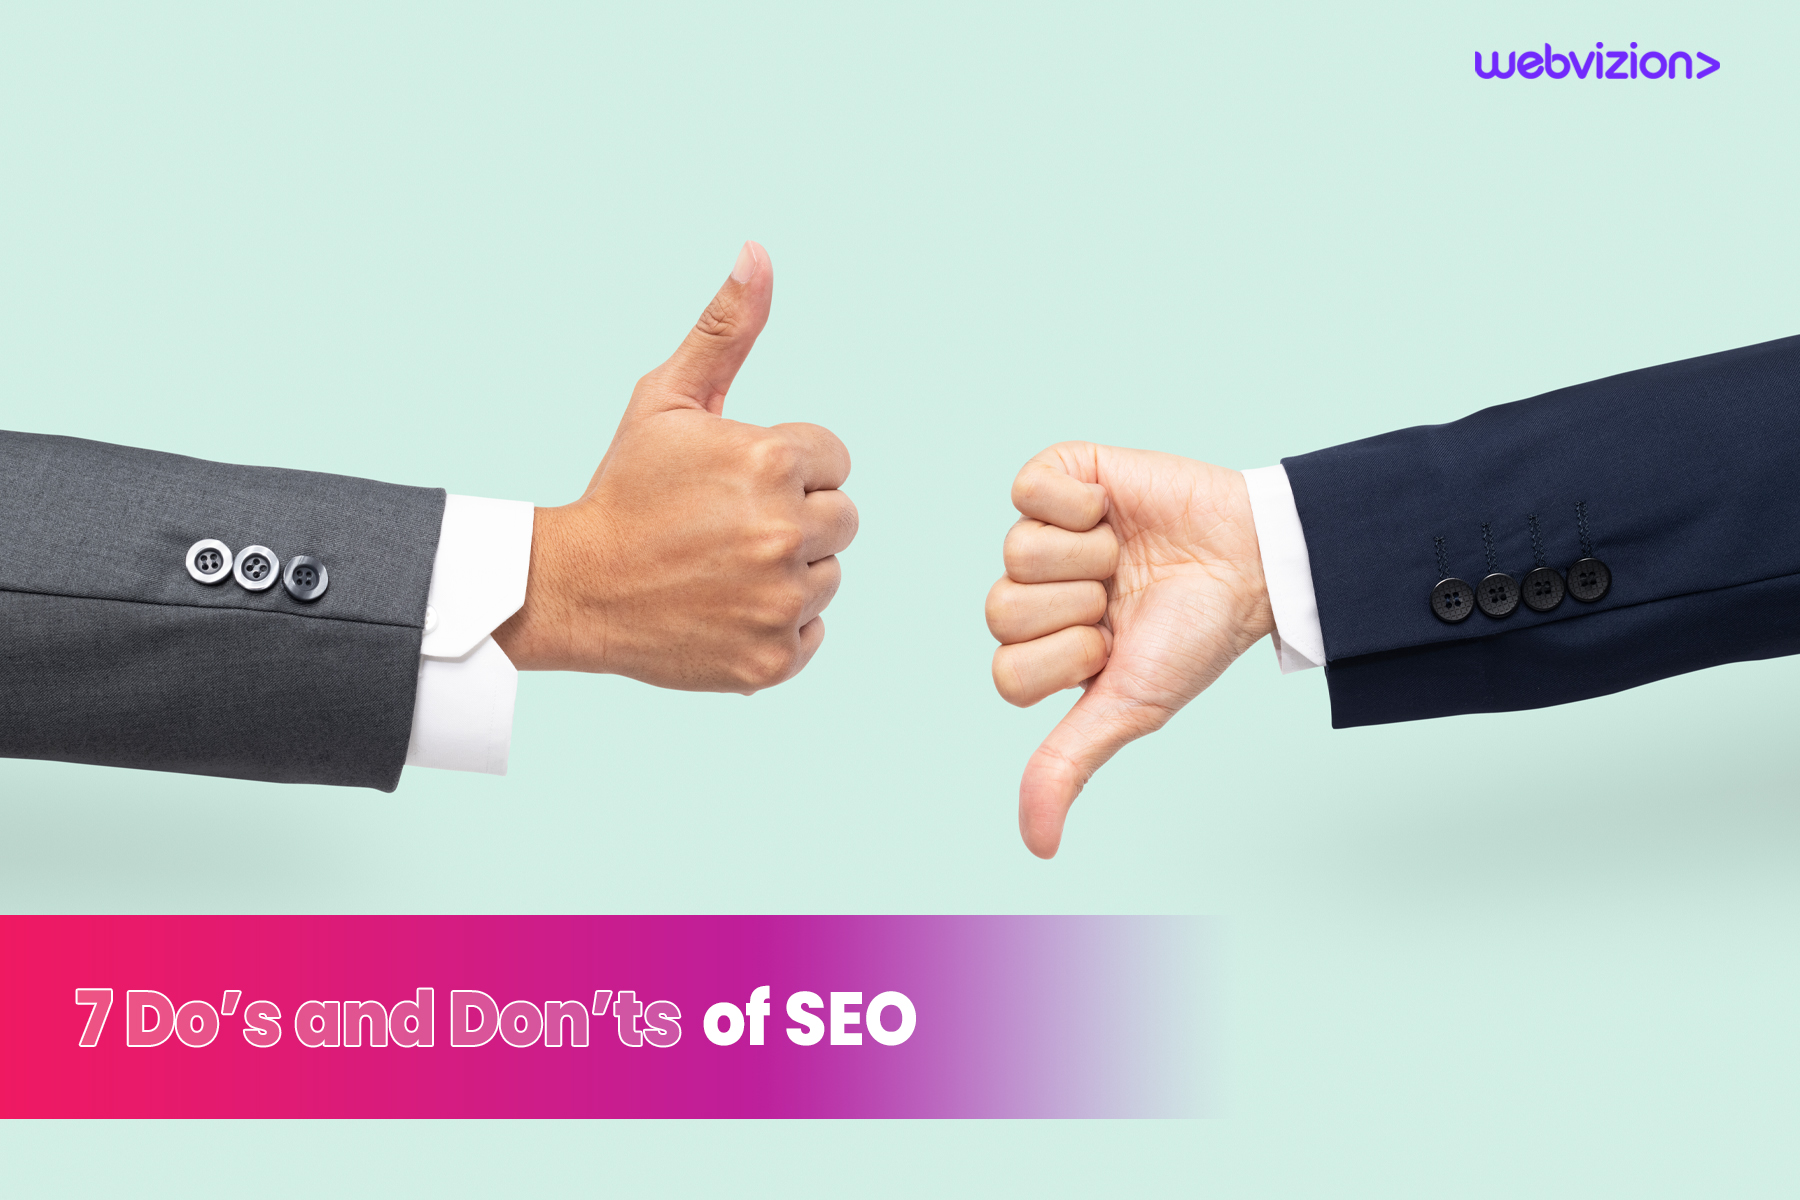 7 Do's and Don’ts of SEO